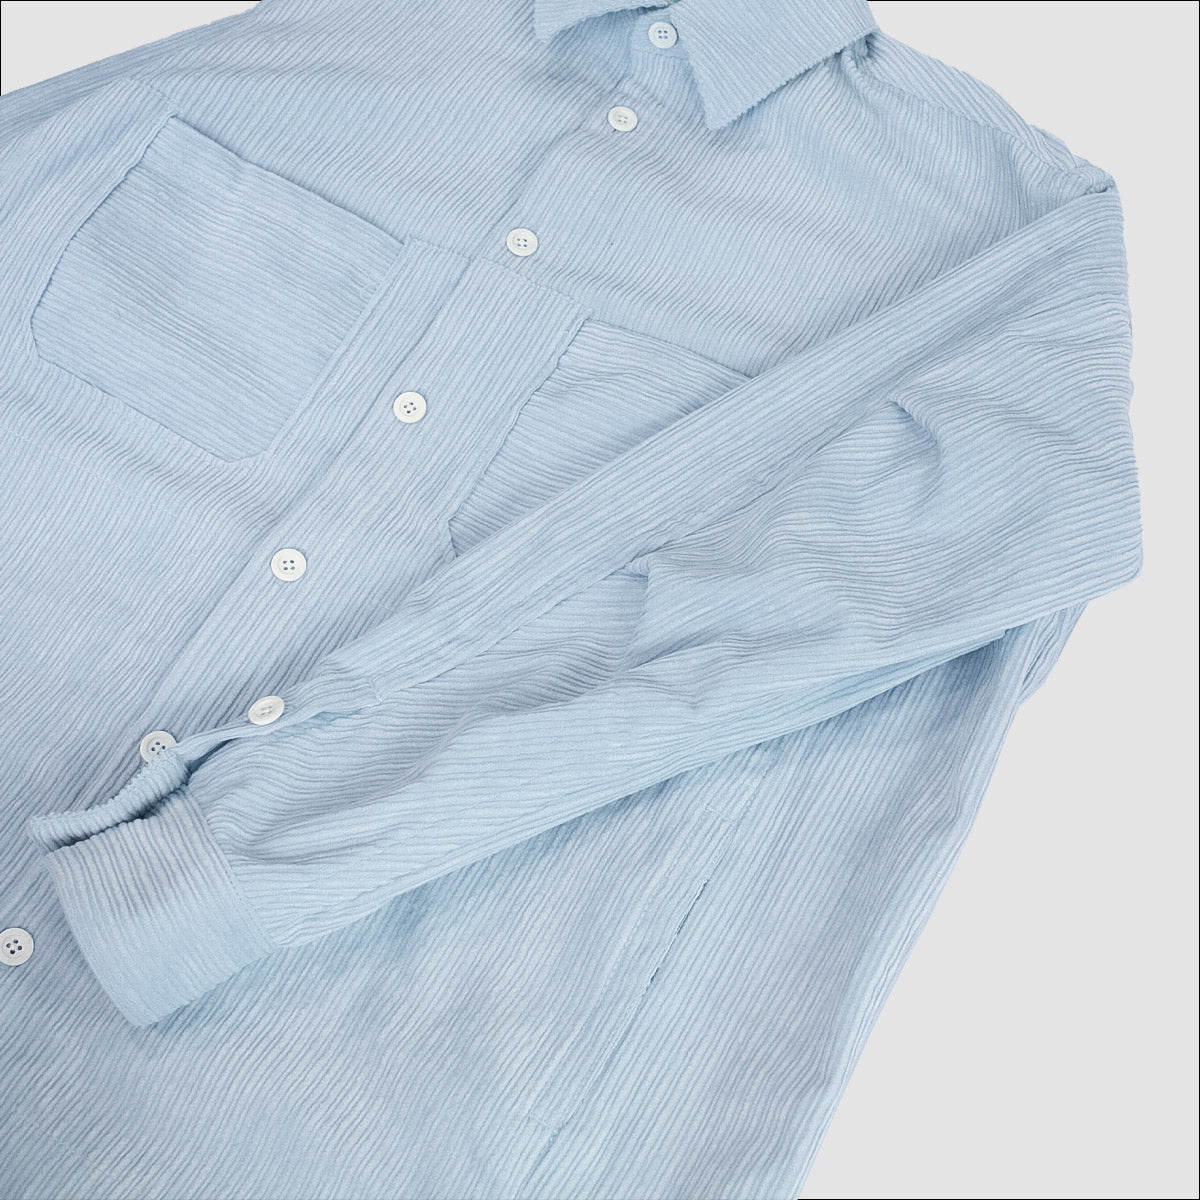 MUZE TURQUOISE LABEL-CIRCUIT RELAXED FIT CORDUROY SHIRTS(LIGHT BLUE) ミューズ 2022年秋冬 コーデュロイシャツ ライトブルー